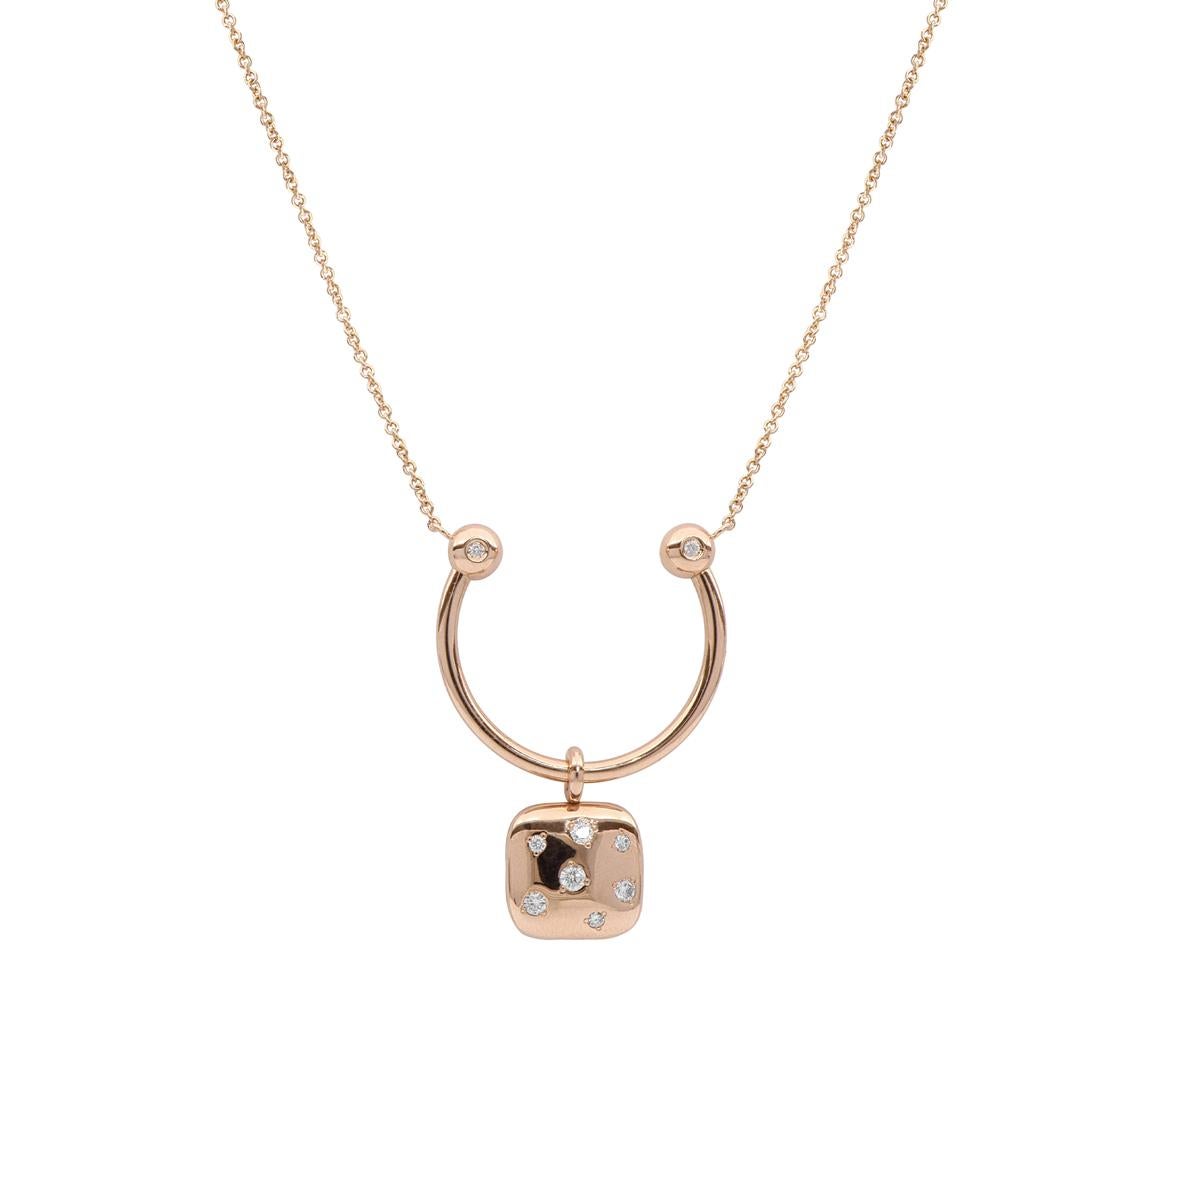 This unique, modern necklace is handcrafted in 18 Kt rose gold. The fine chain holds an original U-shaped design featuring two white brilliant-cut diamond accents. A reversible square pendant dangles from the center showcasing a semi-precious purple